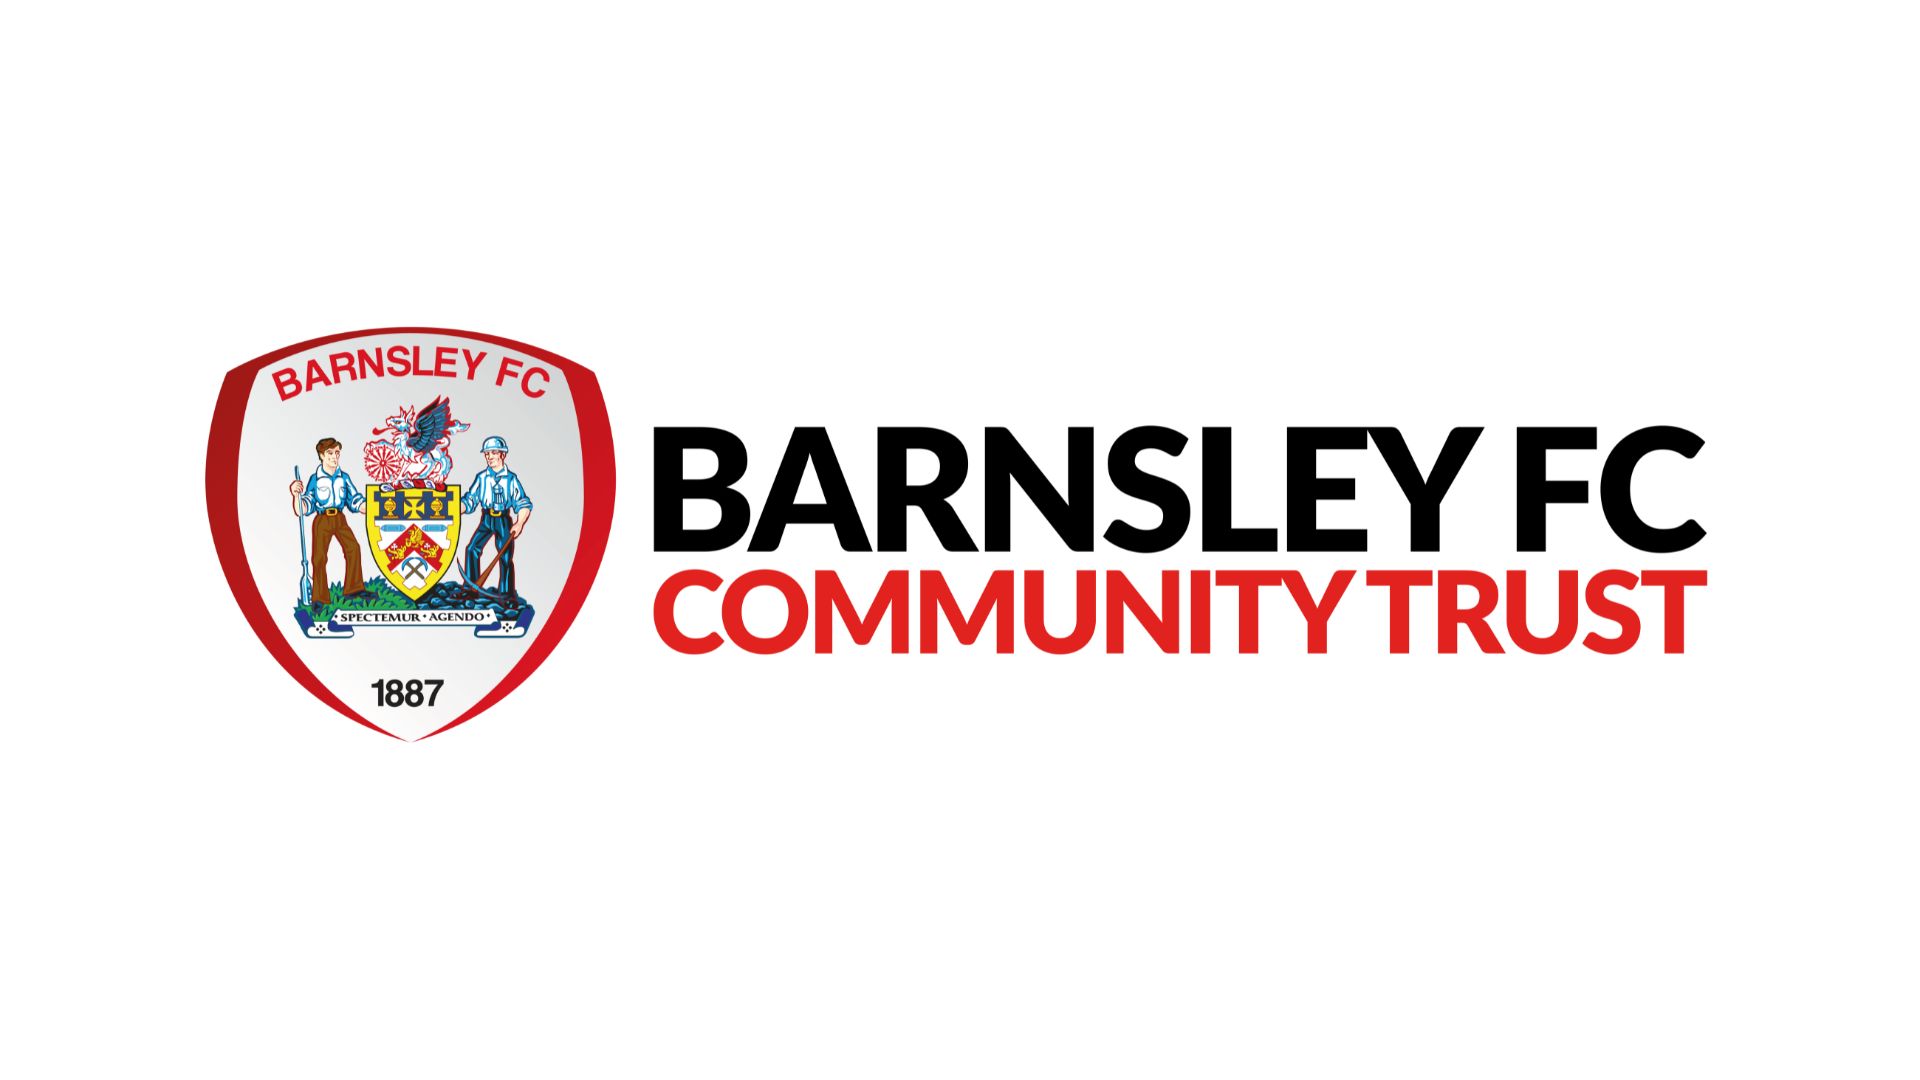 Barnsley FC’s Official Charity sees name change